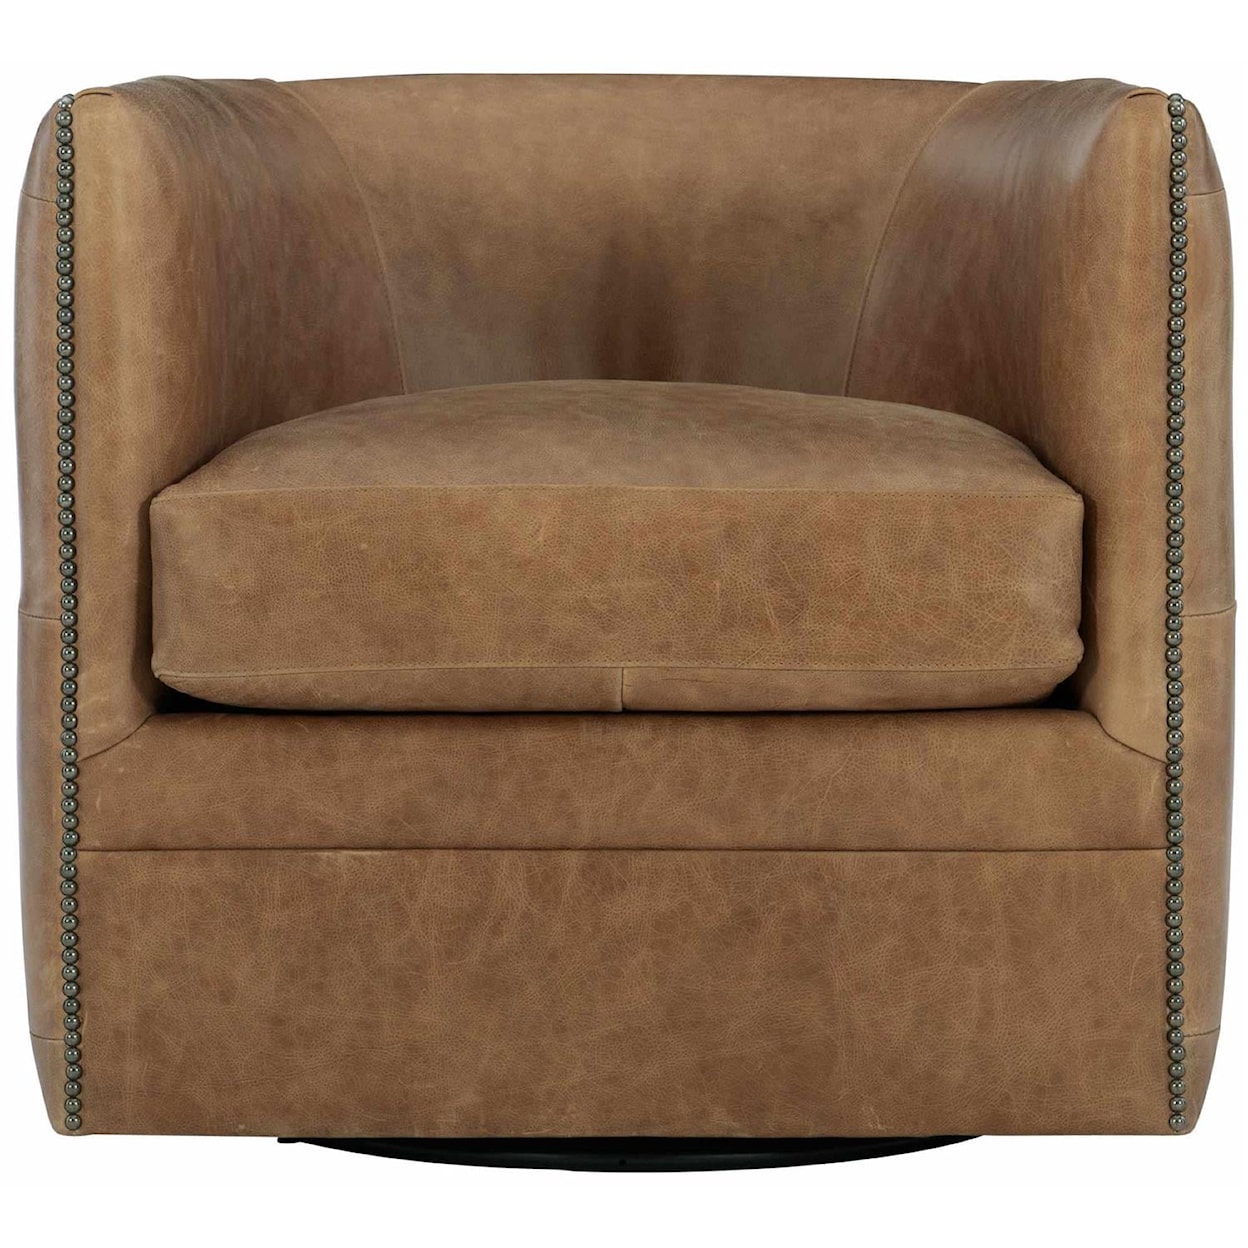 Bernhardt Upholstered Accents Palazzo Leather Swivel Chair